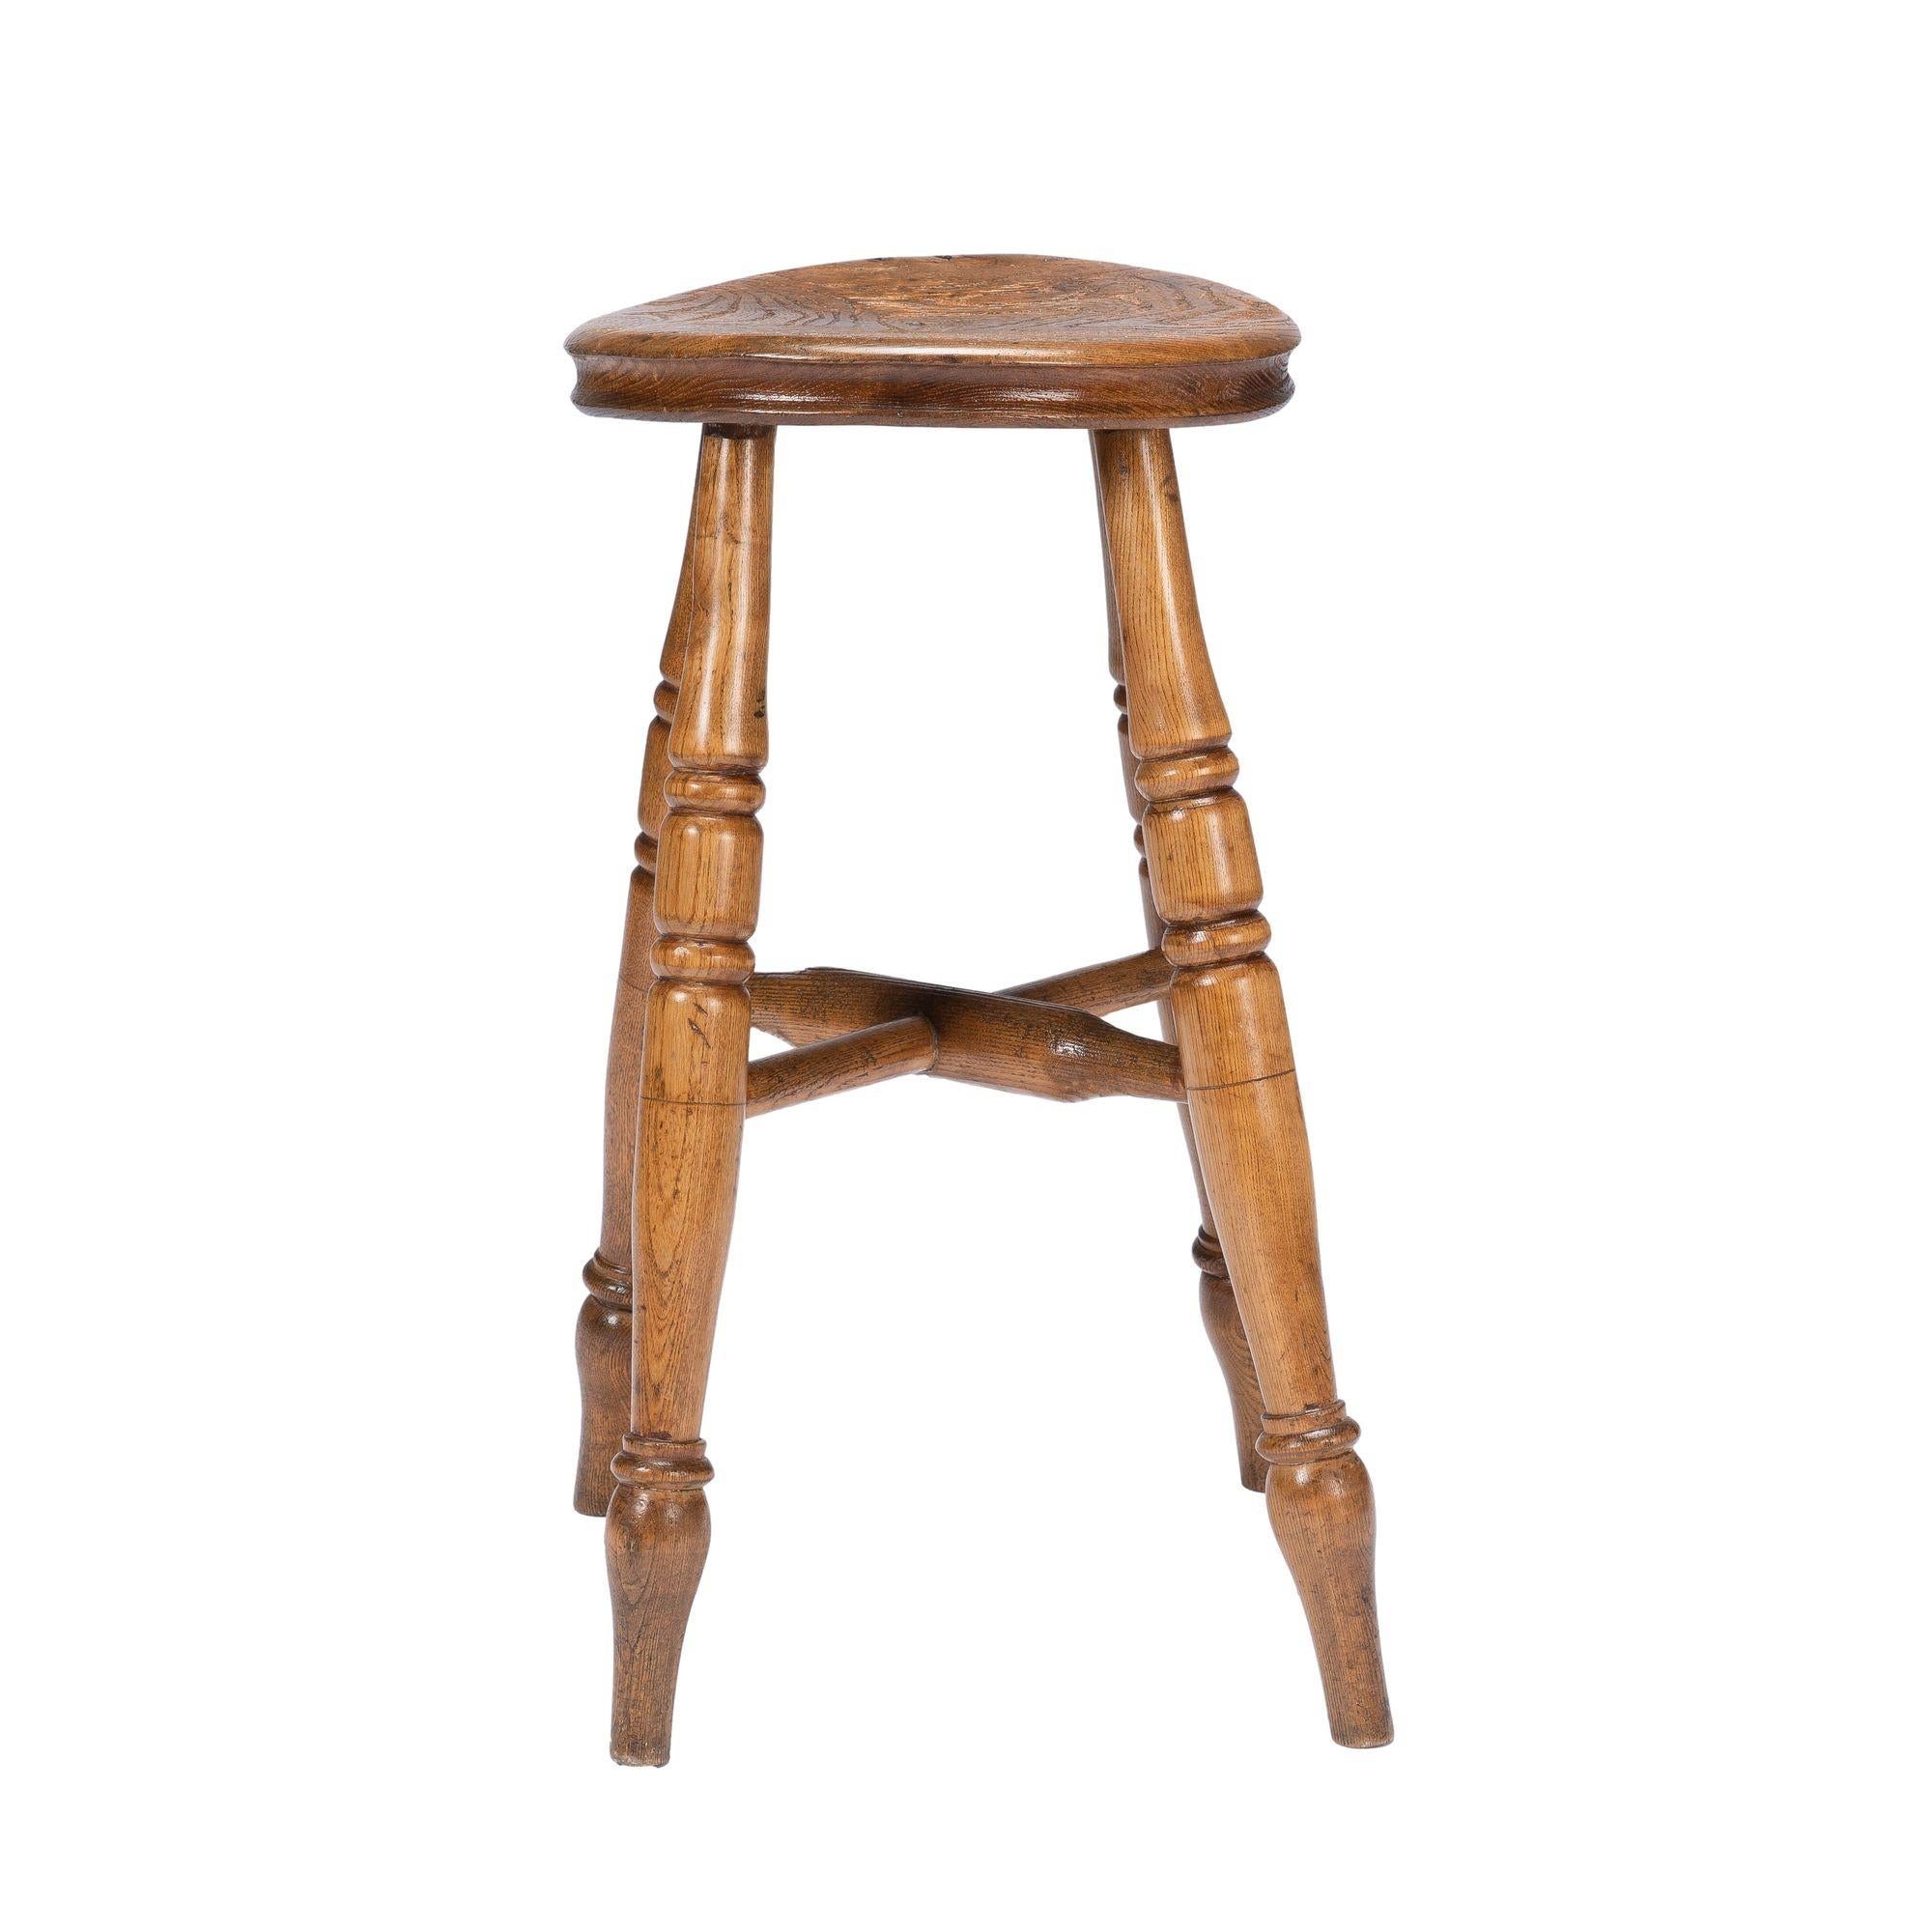 Country English Elm Wood Milking Stool '1860' For Sale